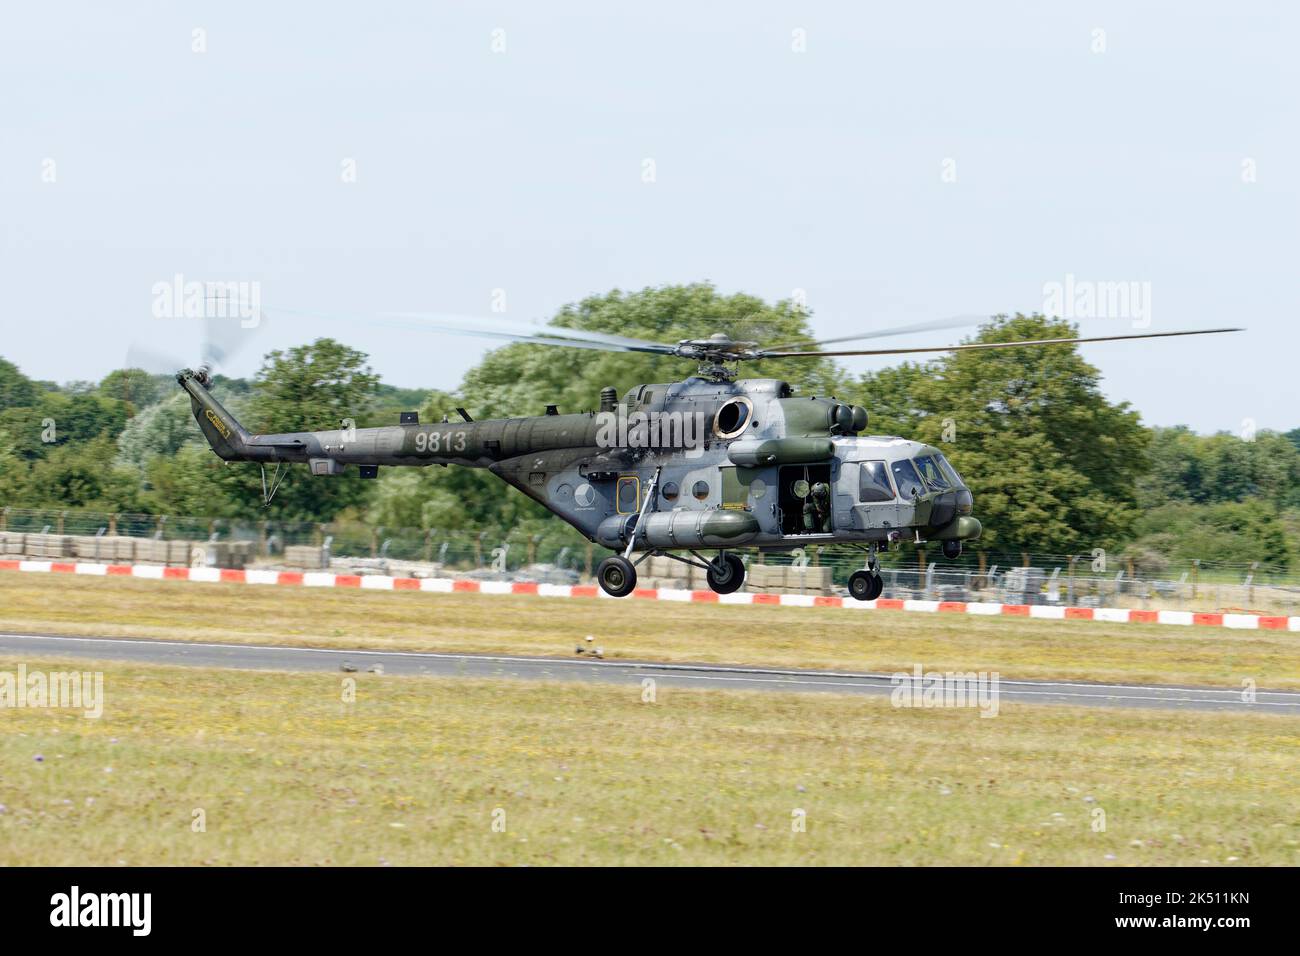 MIL MI-171s Military Transport Helicopter della Czech Air Force dimostra al RAF Fairford come parte del Royal International Air Tattoo Foto Stock